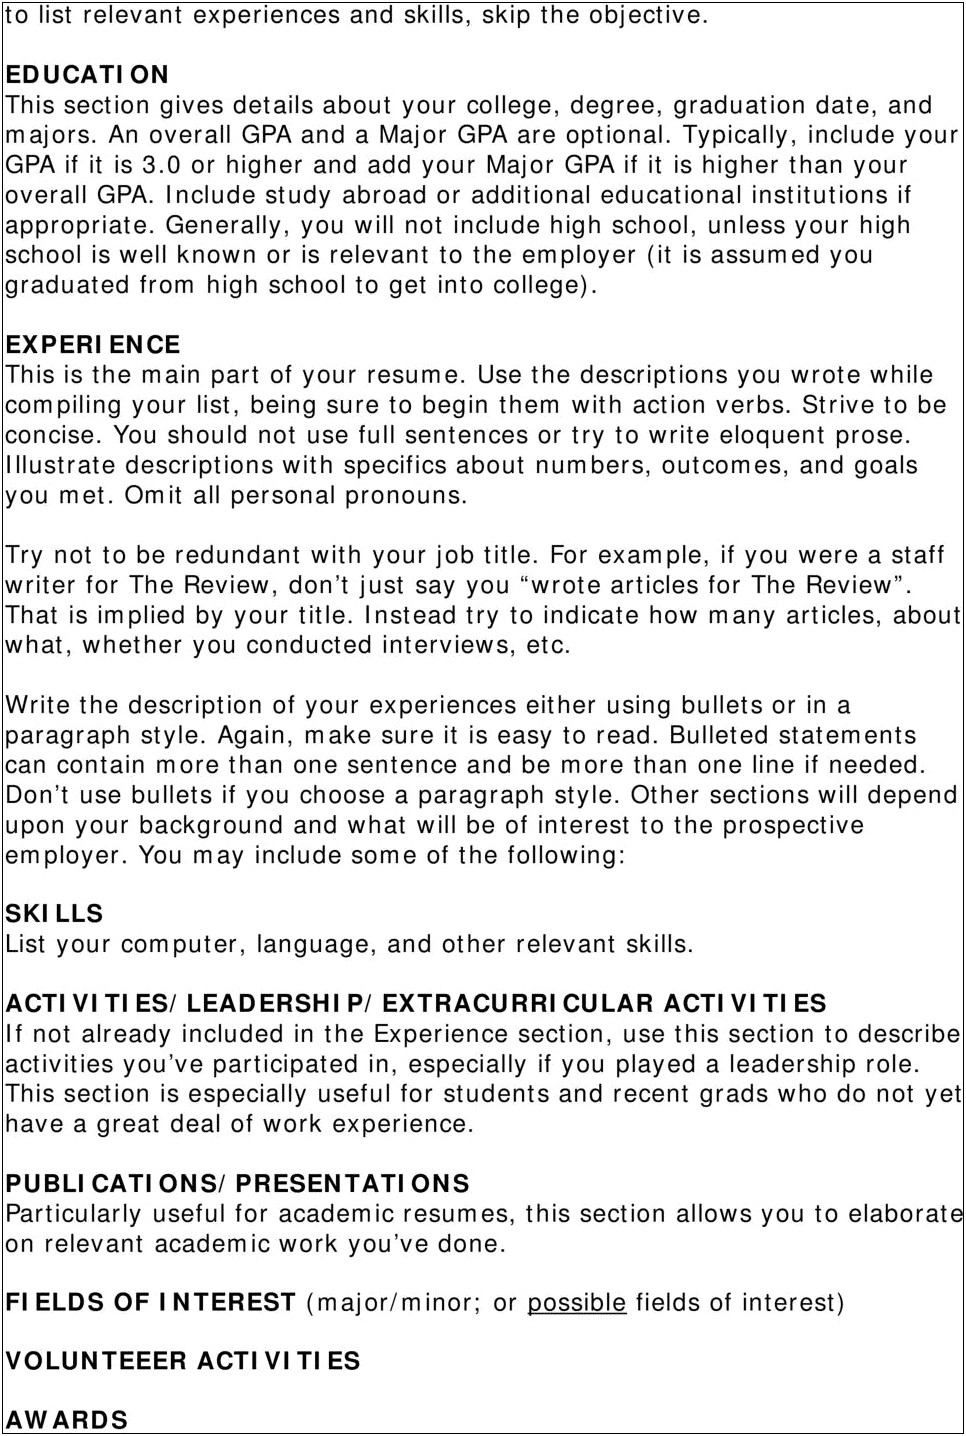 Do You Put Extracurricular Activities Resume Without Leadership